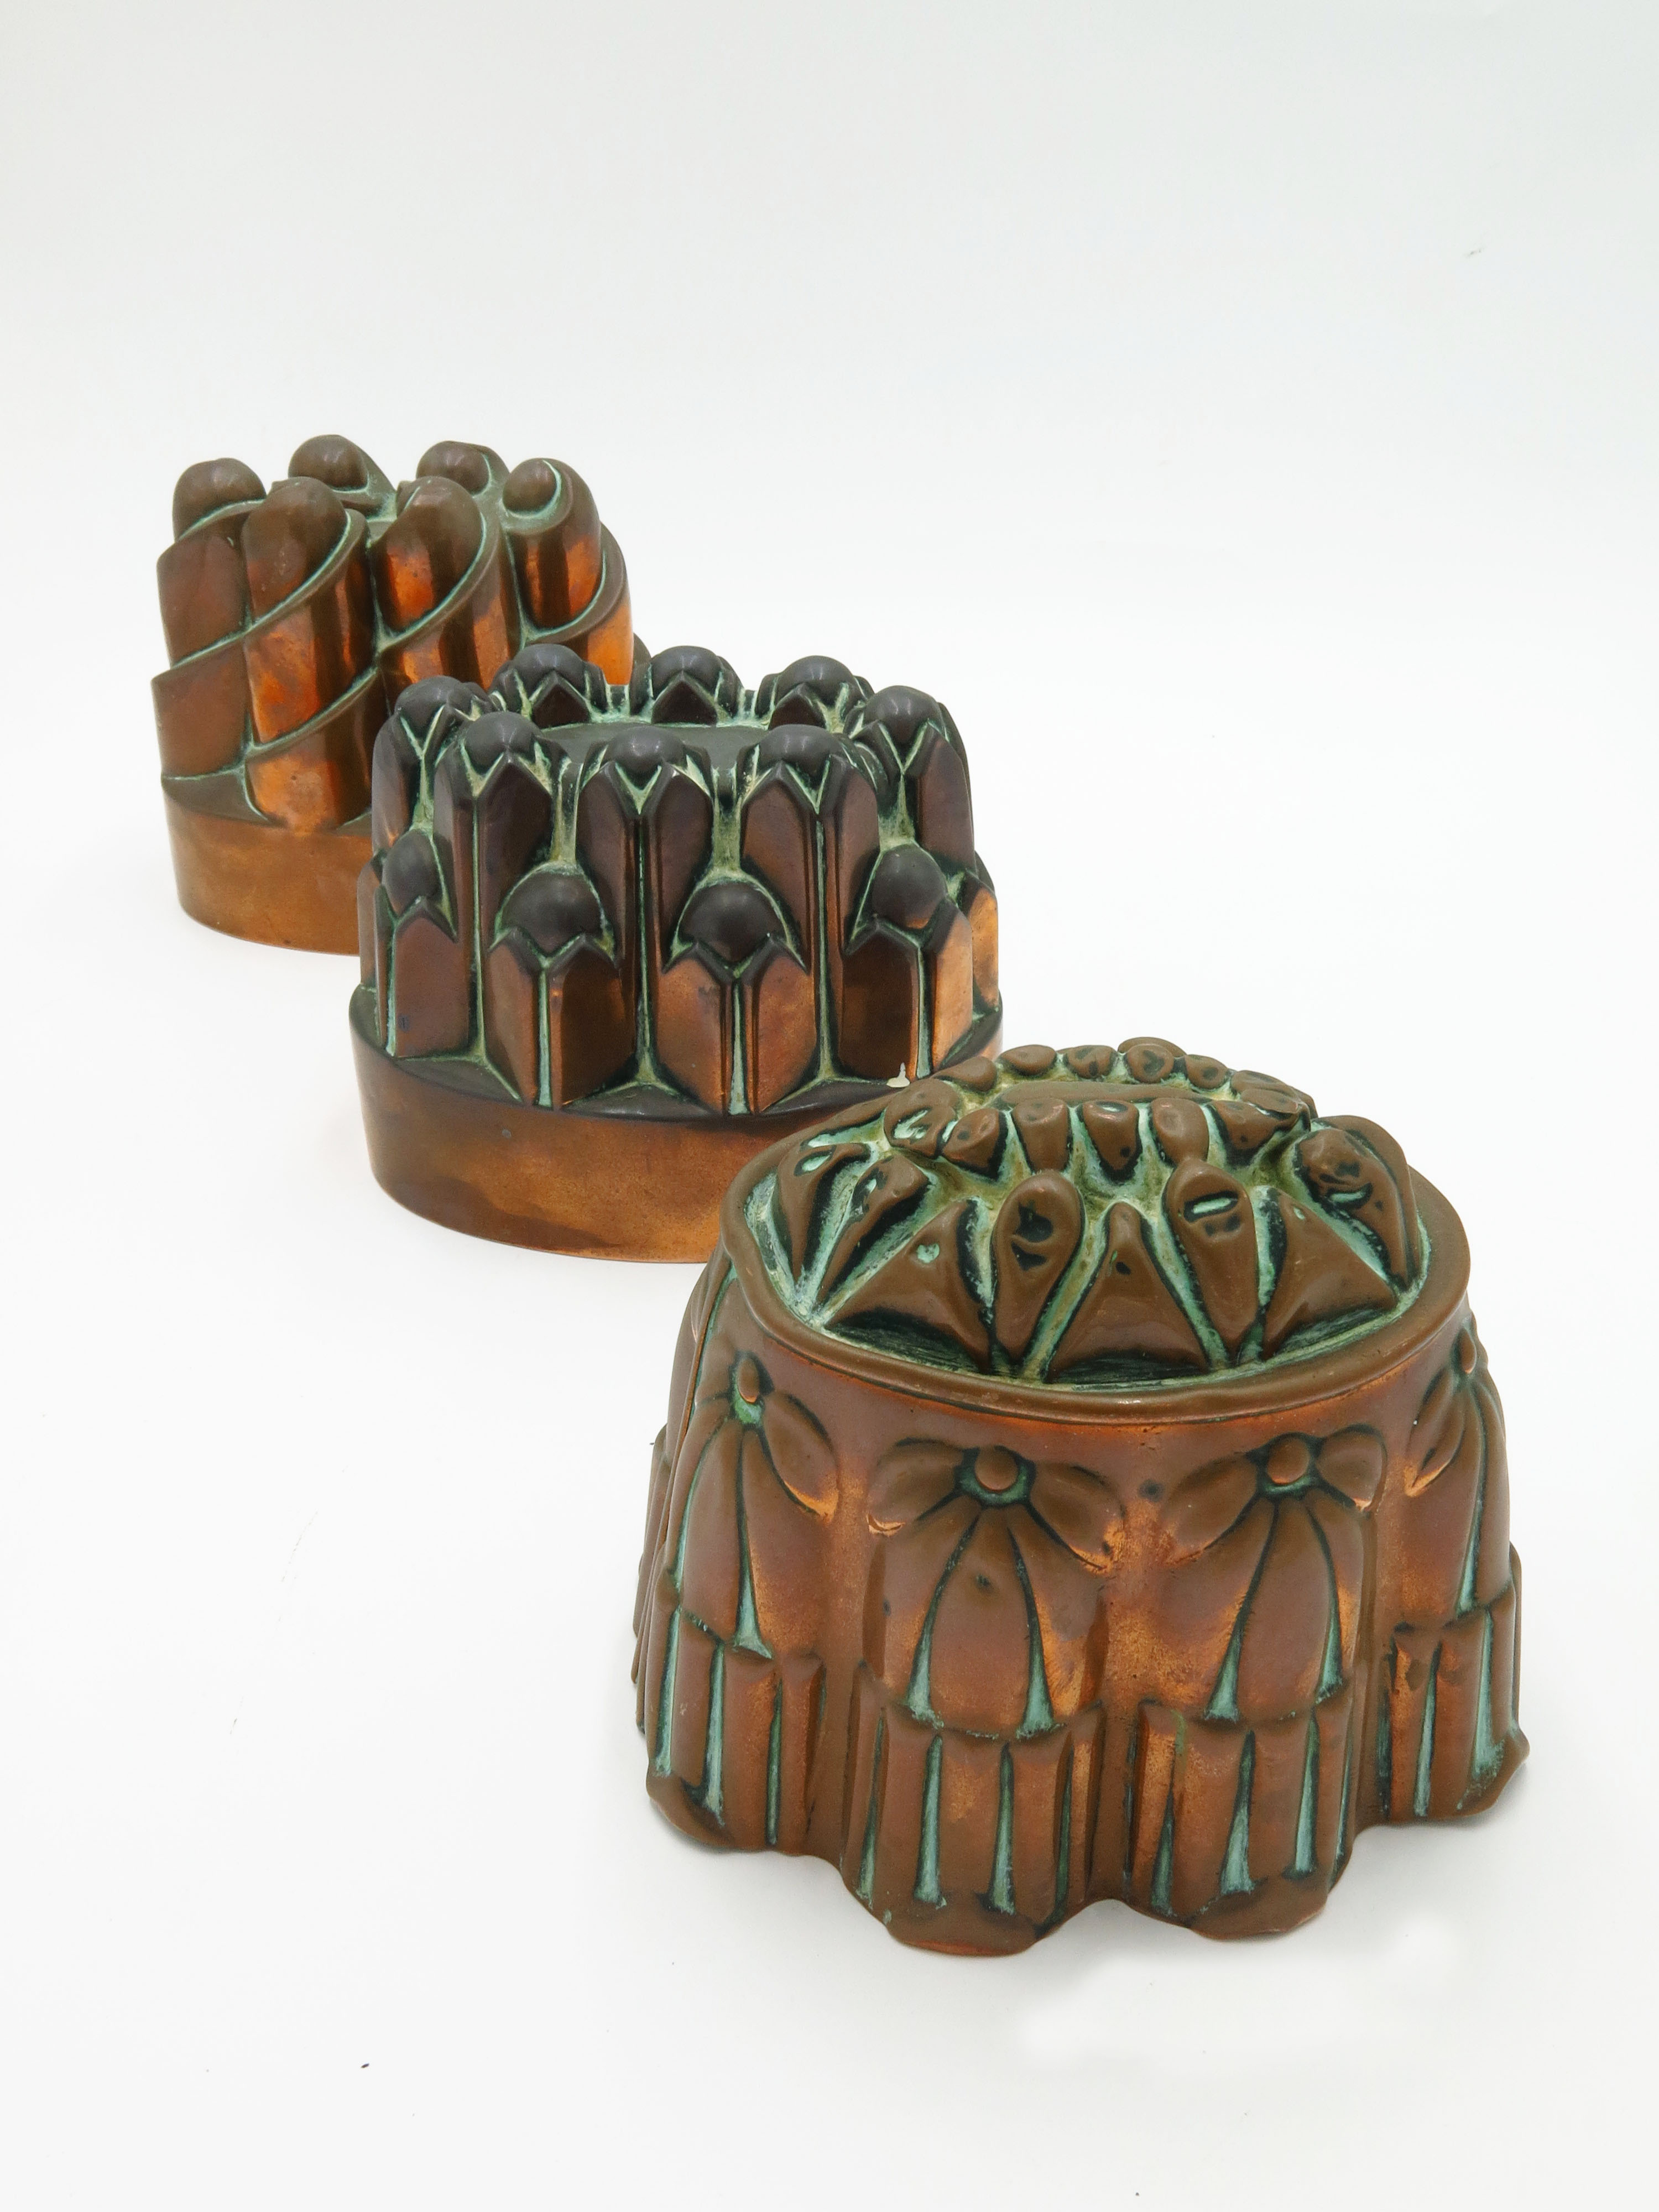 A Victorian copper jelly mould, by Benham and Froud, with vertical turret design,